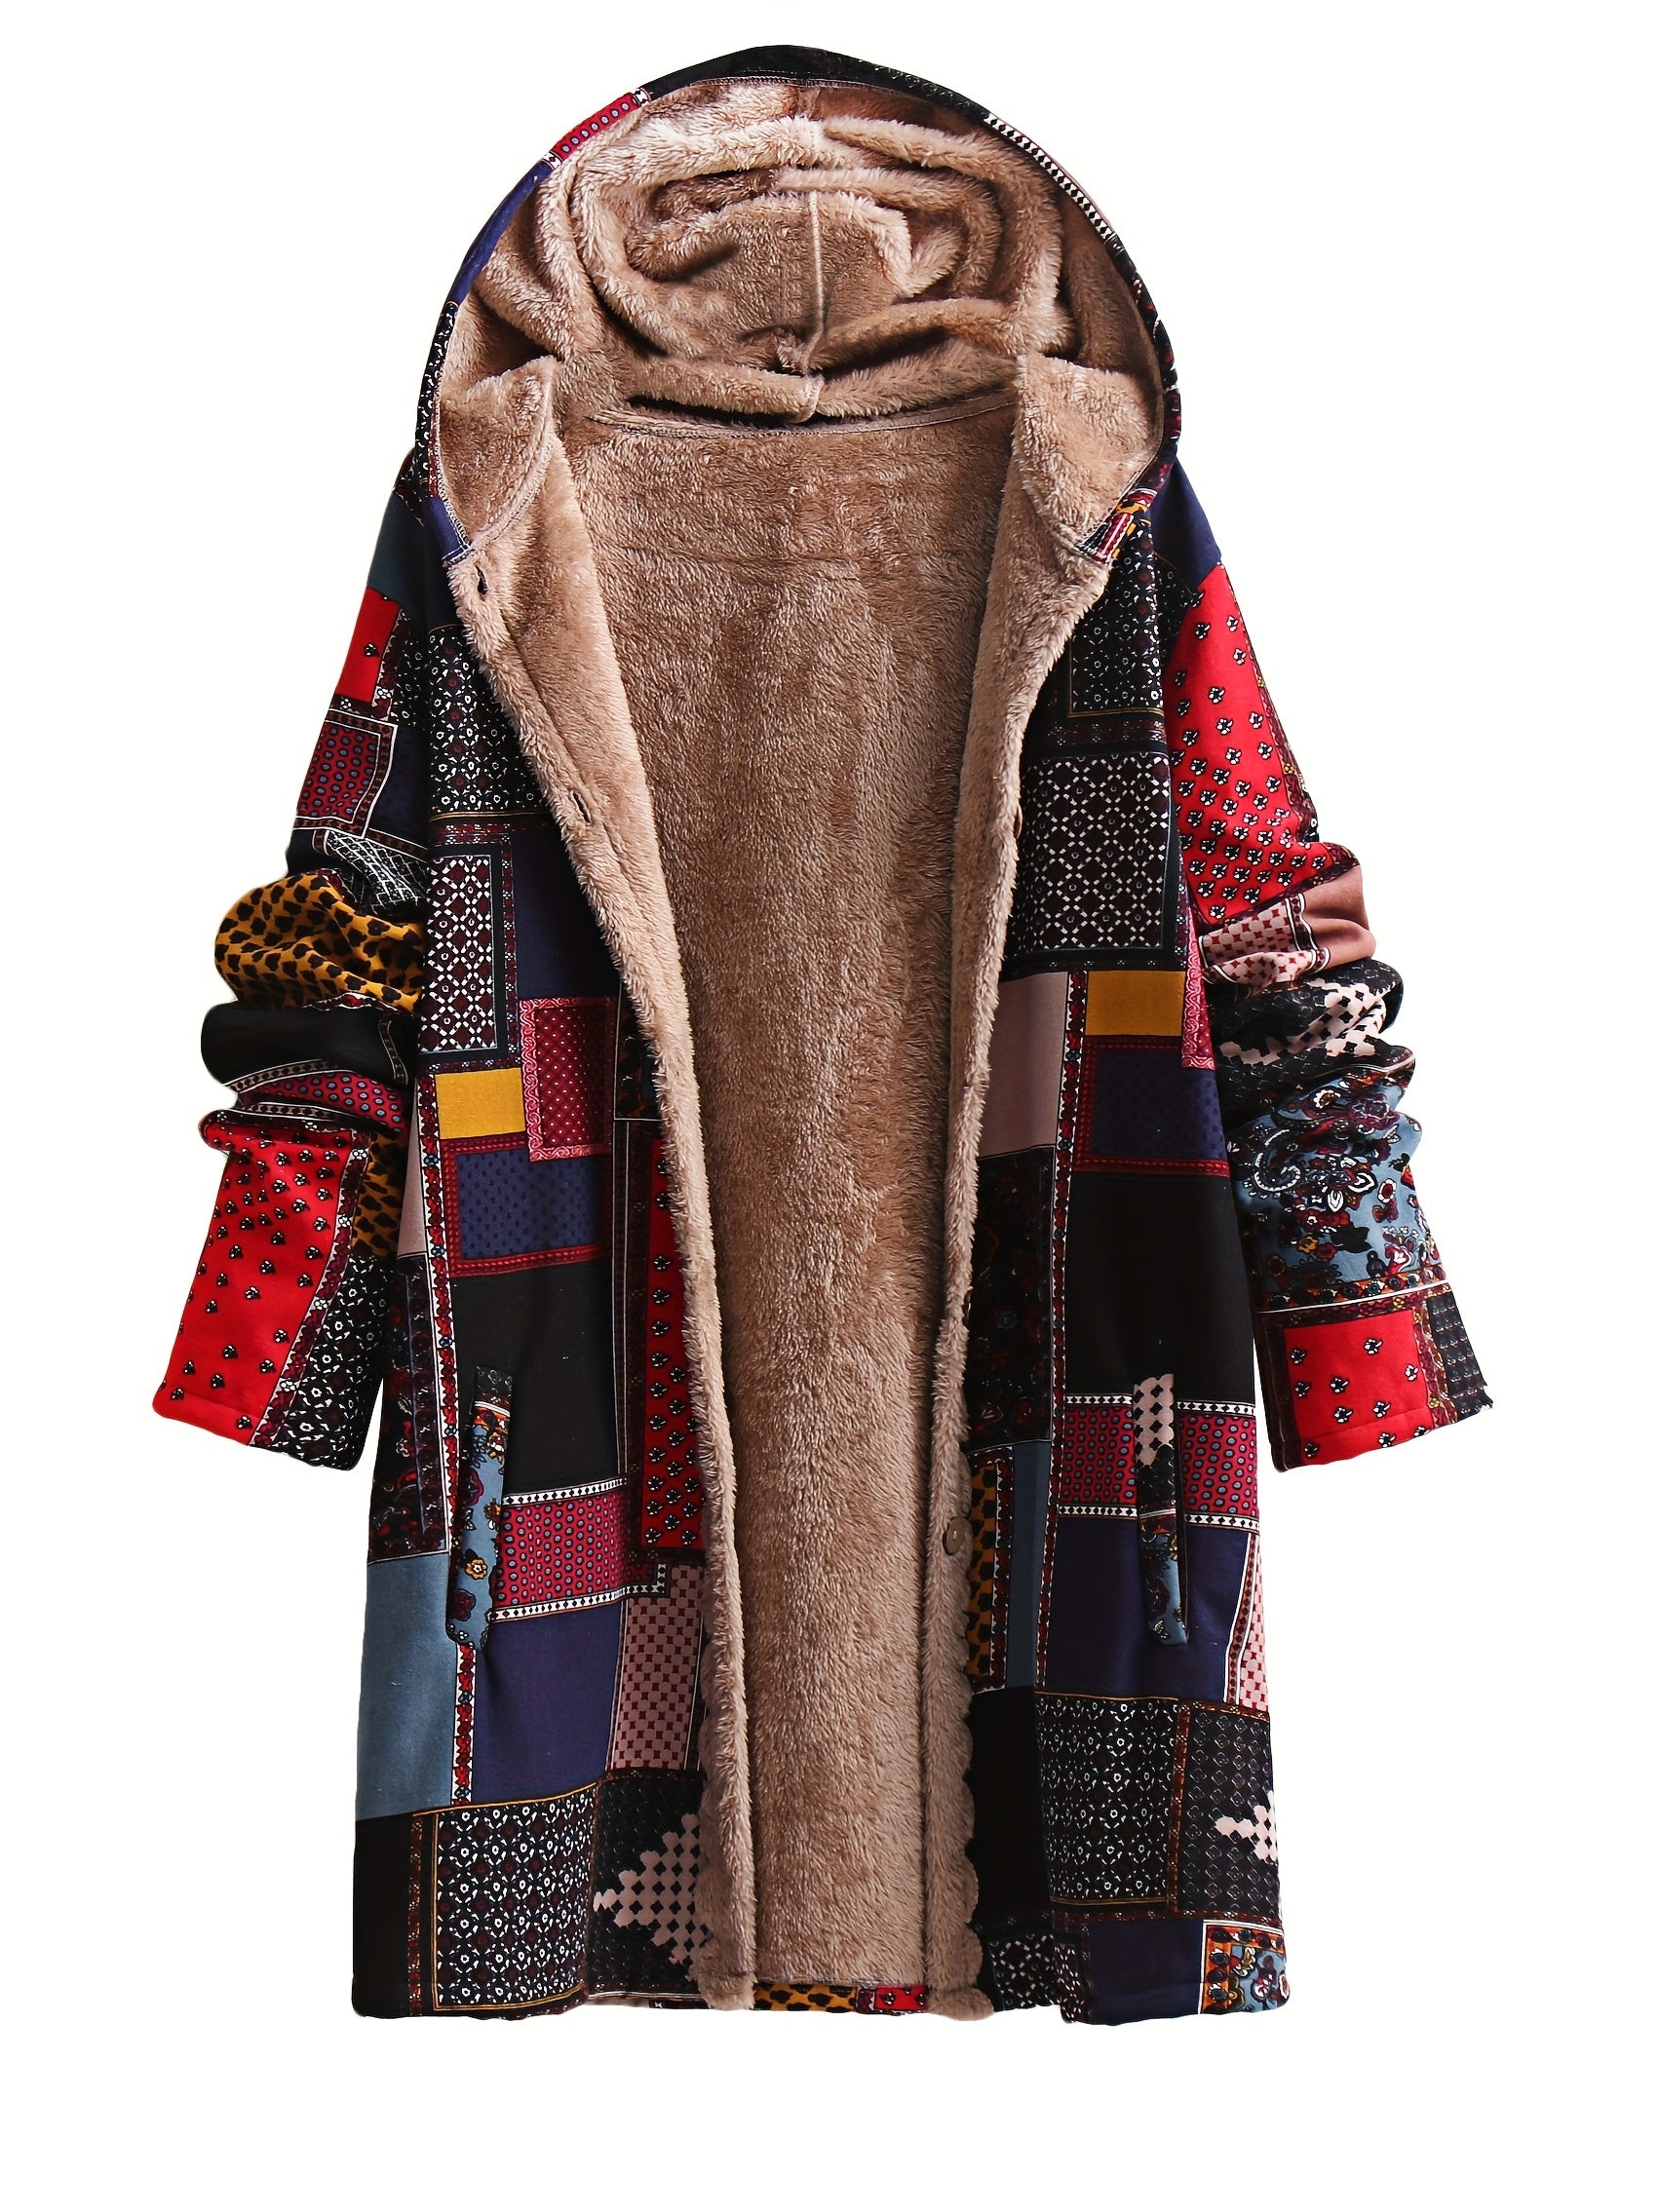 Plus Size Boho Coat, Women's Plus Patchwork Print Liner Fleece Long Sleeve Button Up Hooded Tunic Coat With Pockets